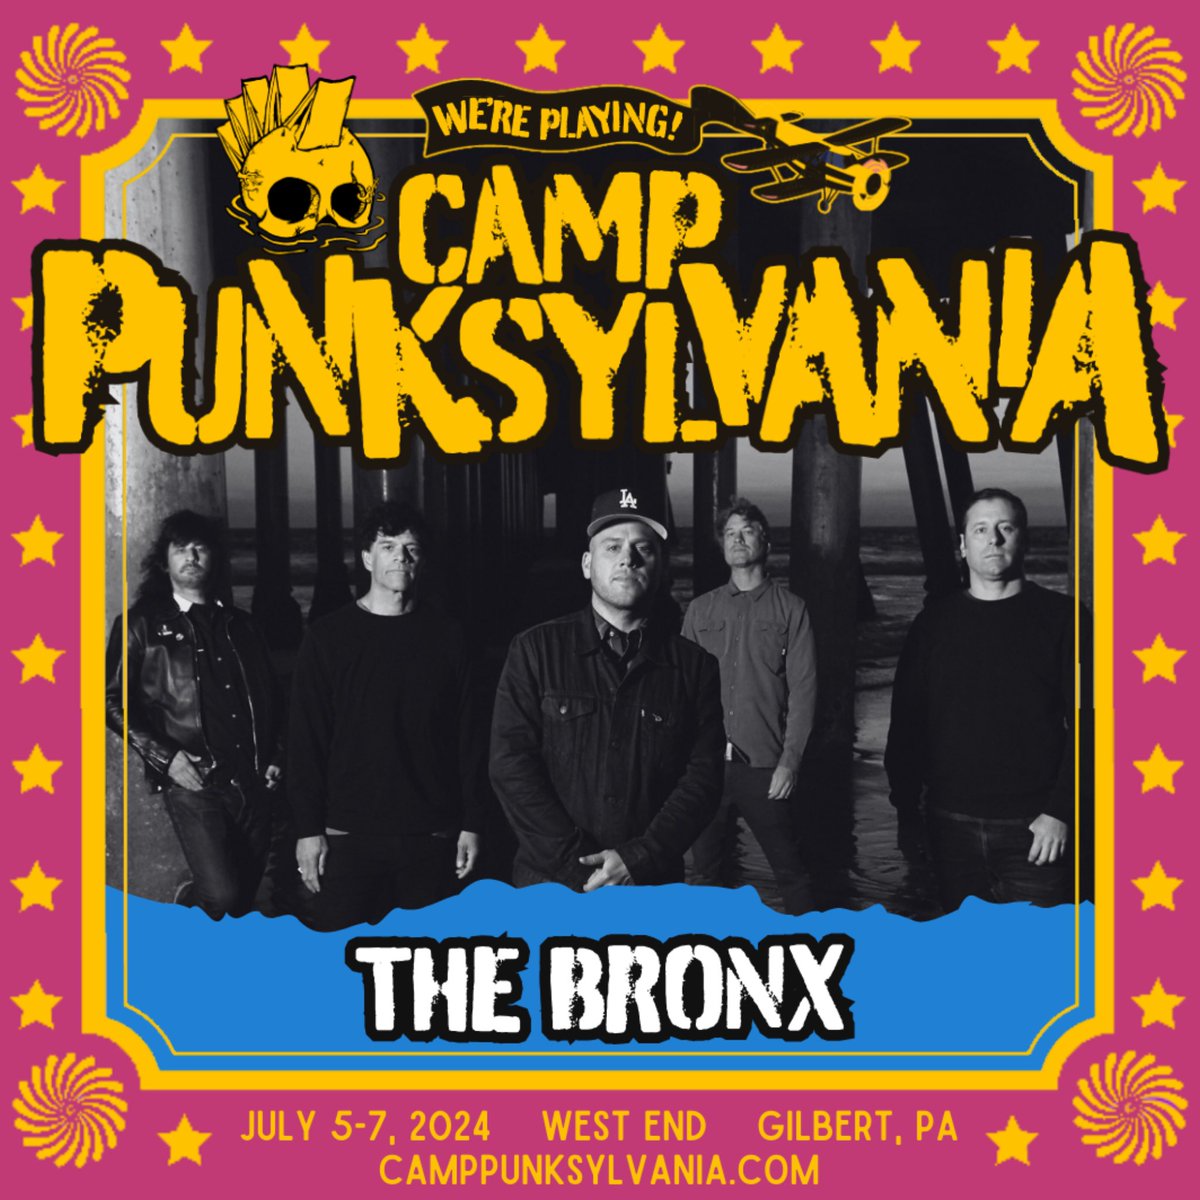 It’s on at Camp Punksylvania 4th of July Weekend! 👊Tickets on sale now at camppunksylvania.com